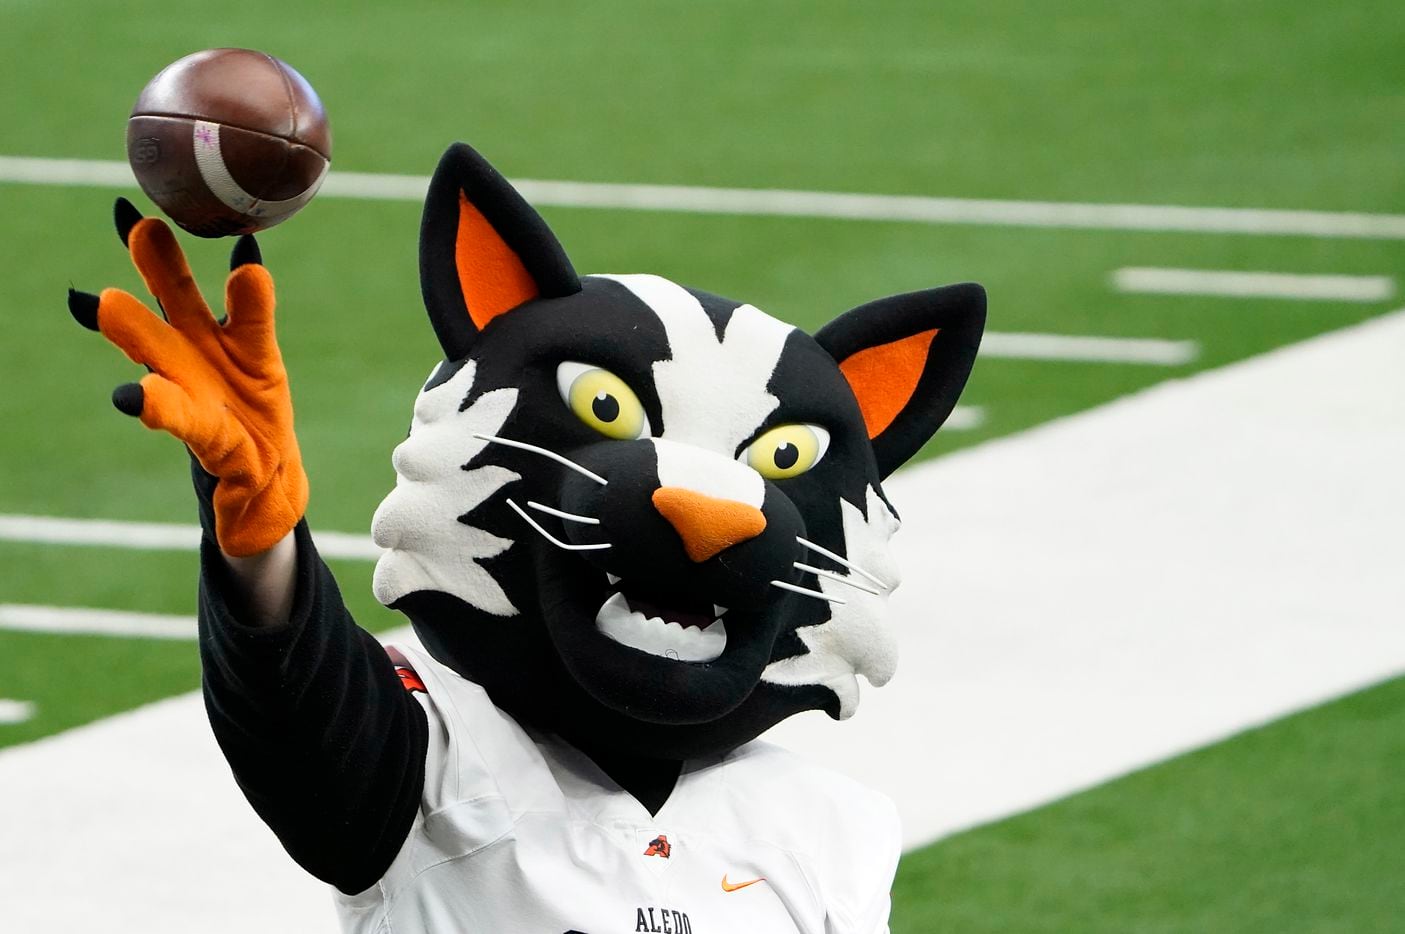 The Aledo mascot tosses a ball on the sidelines during the first half of the Class 5A Division II state football championship game against Crosby at AT&T Stadium on Friday, Jan. 15, 2021, in Arlington. (Smiley N. Pool/The Dallas Morning News)